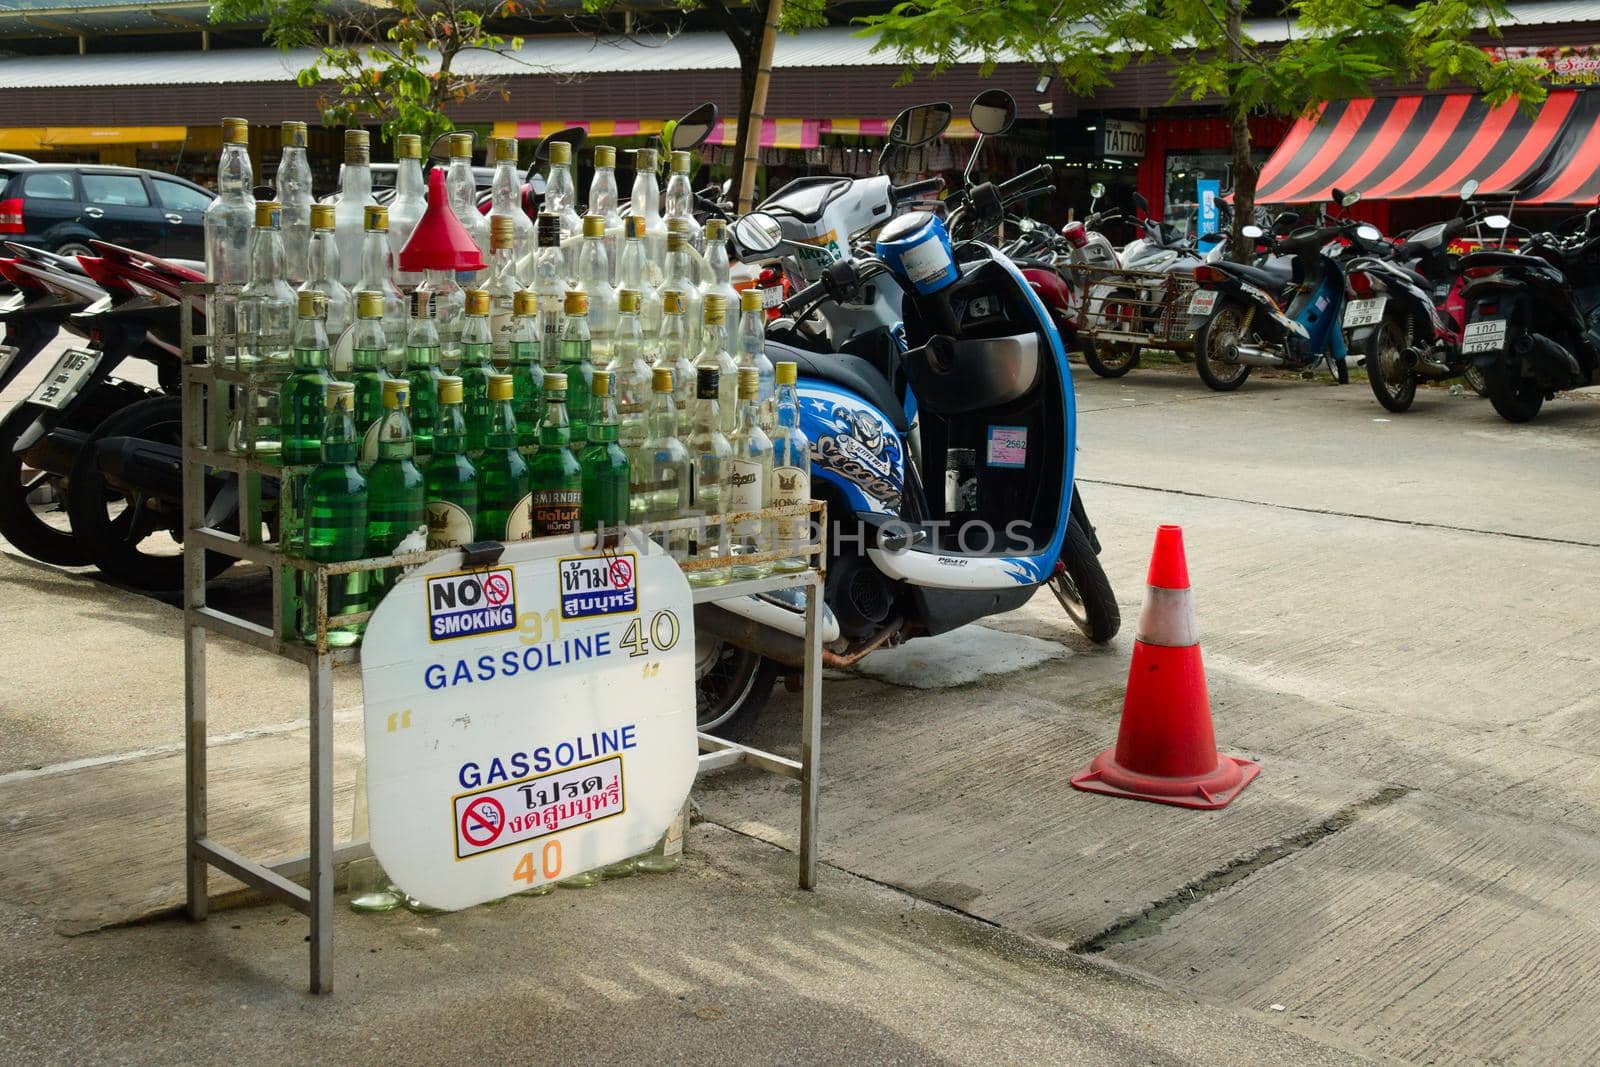 2019-11-05 / Phuket, Thailand - Bottles of gasoline for sale in a motorcycle rental stand. by hernan_hyper